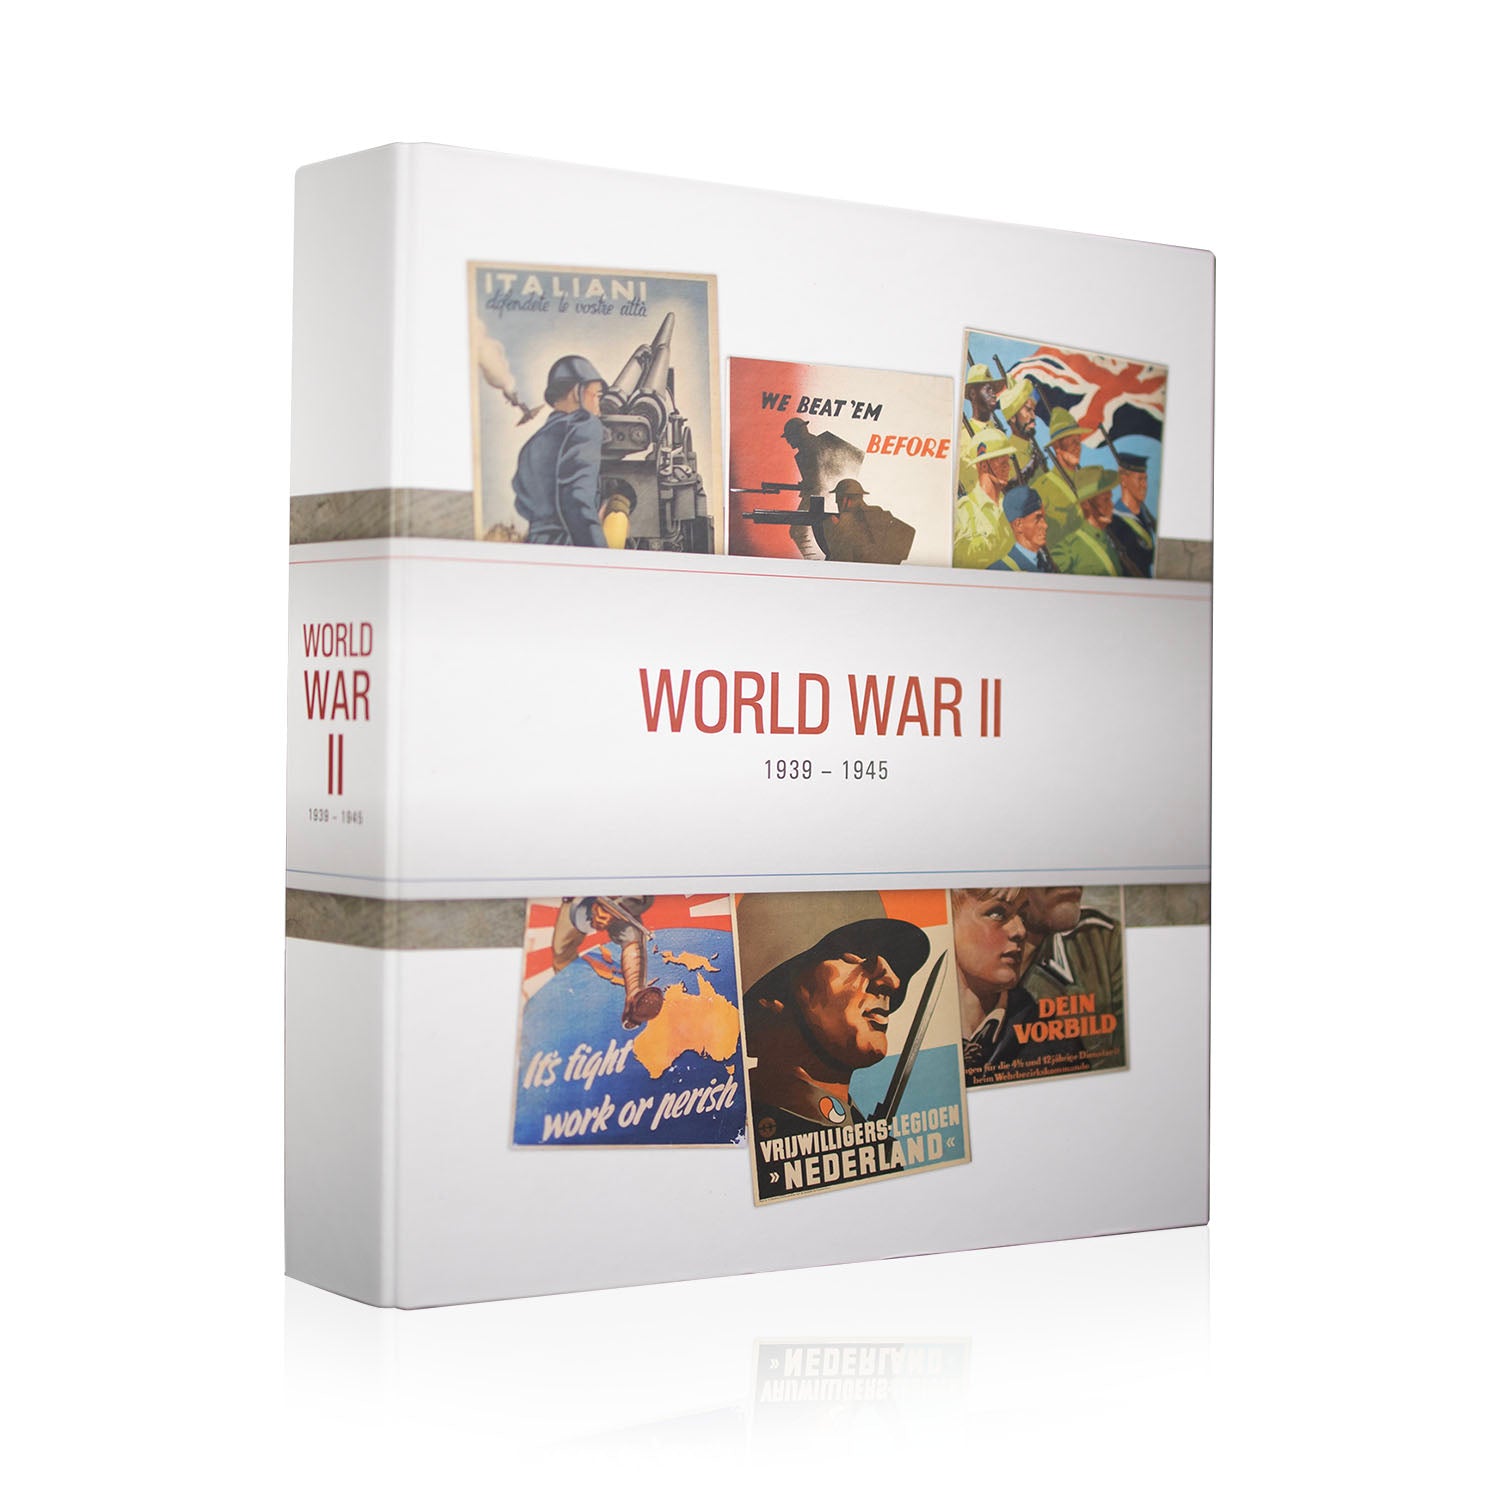 The WWII Historical Artefacts Collector Edition